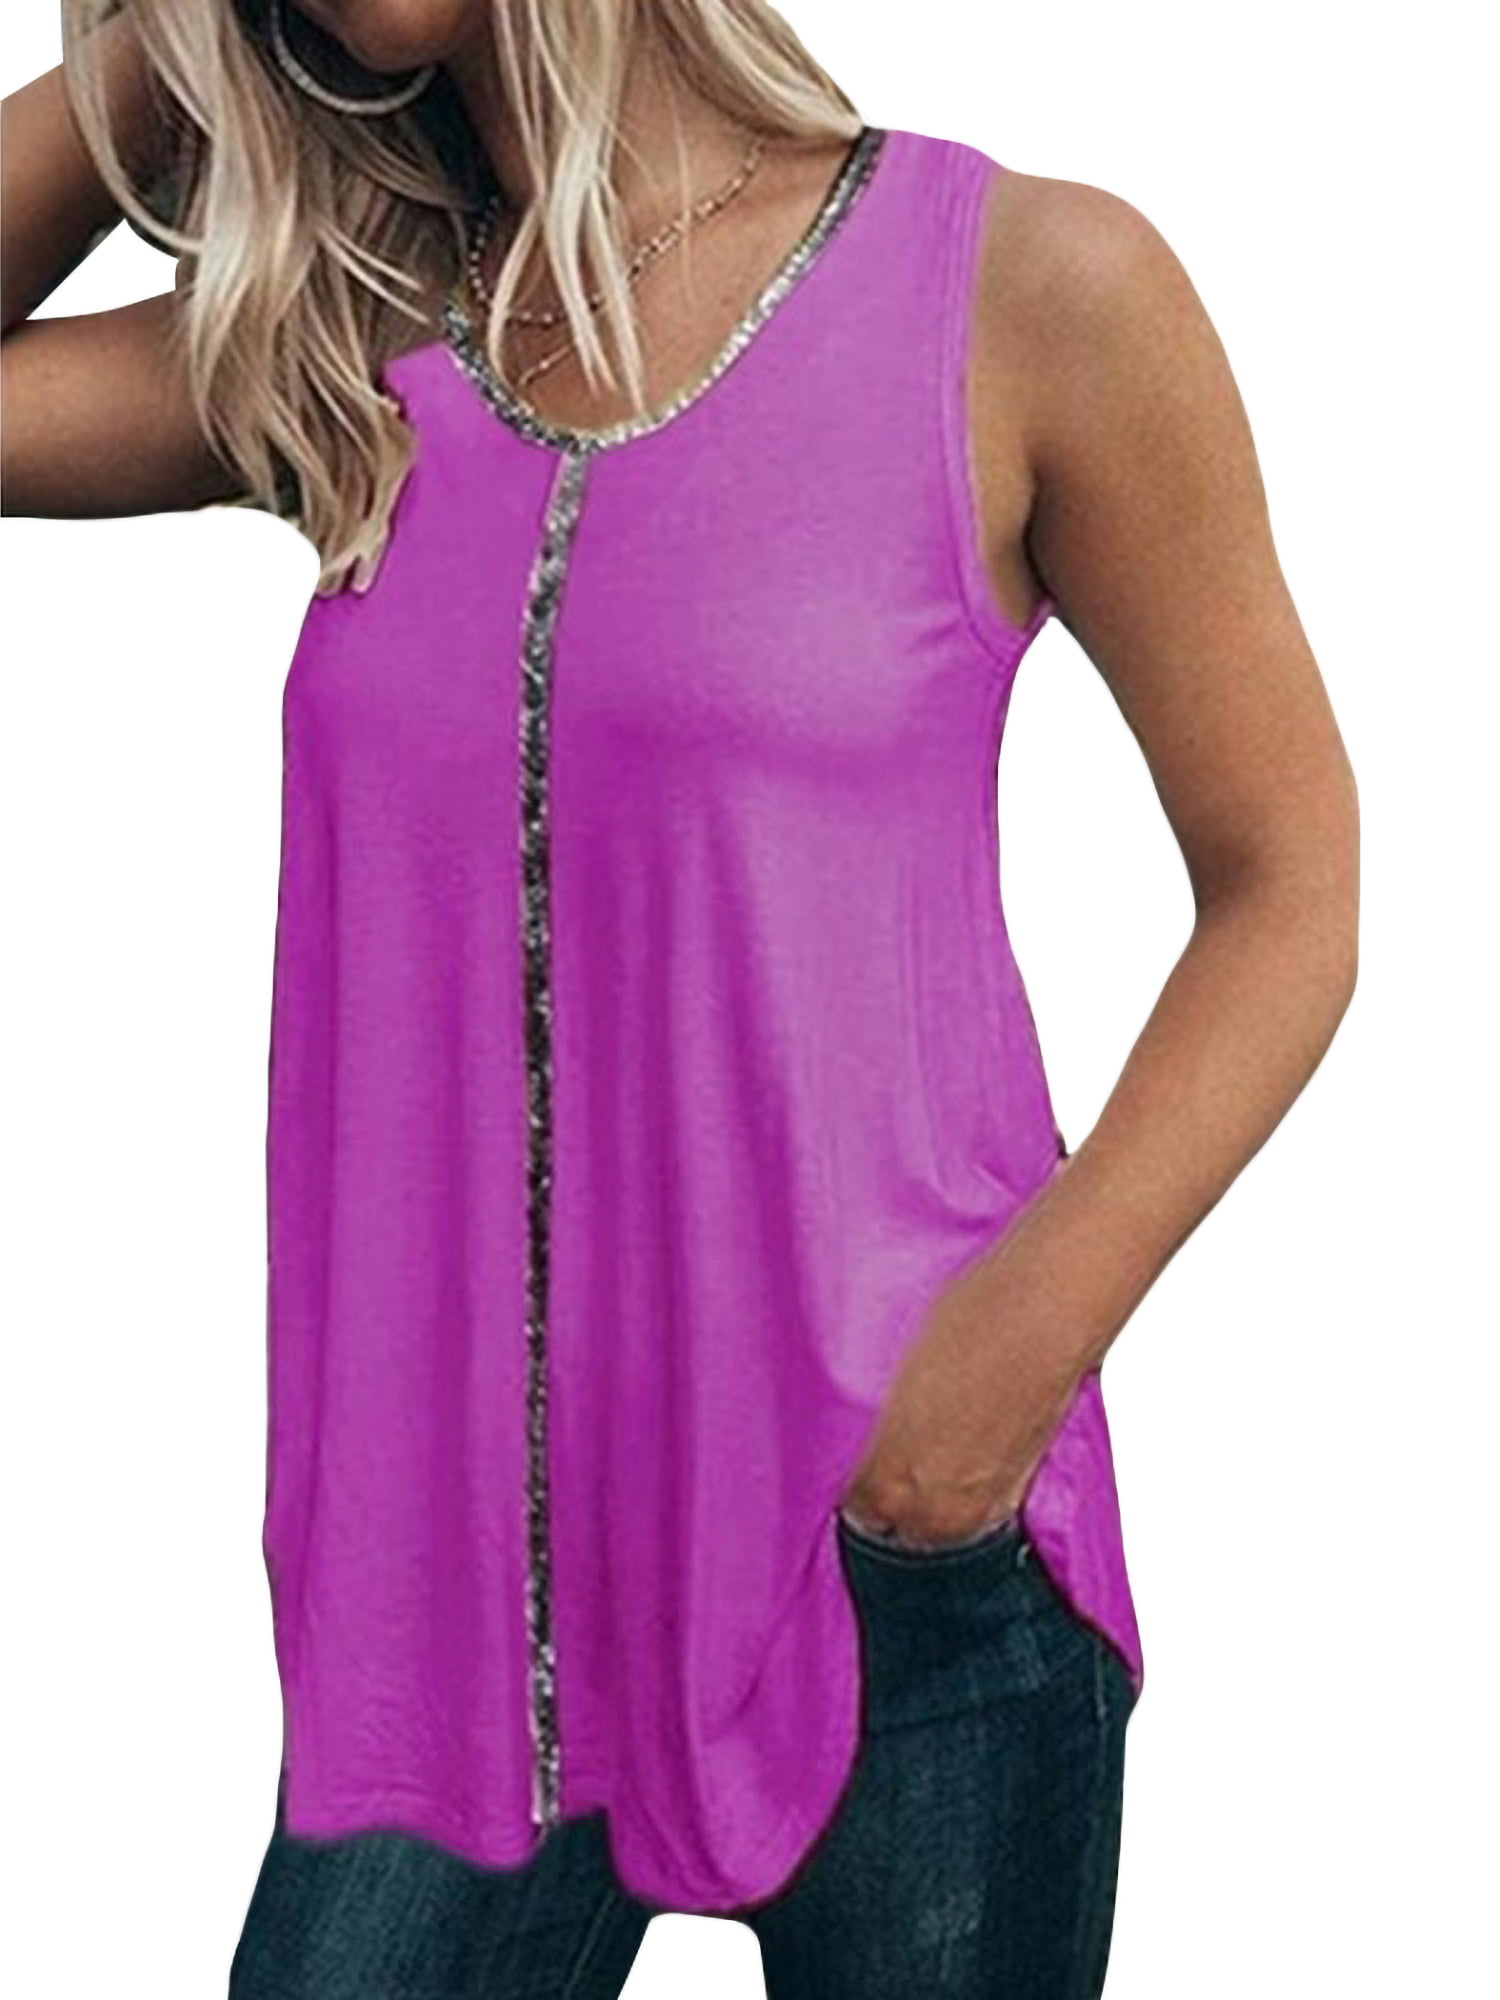 Womens Tops V Neck Strappy Shirts Sleeveless Sequin Camisole Blouses Slim Tunics 